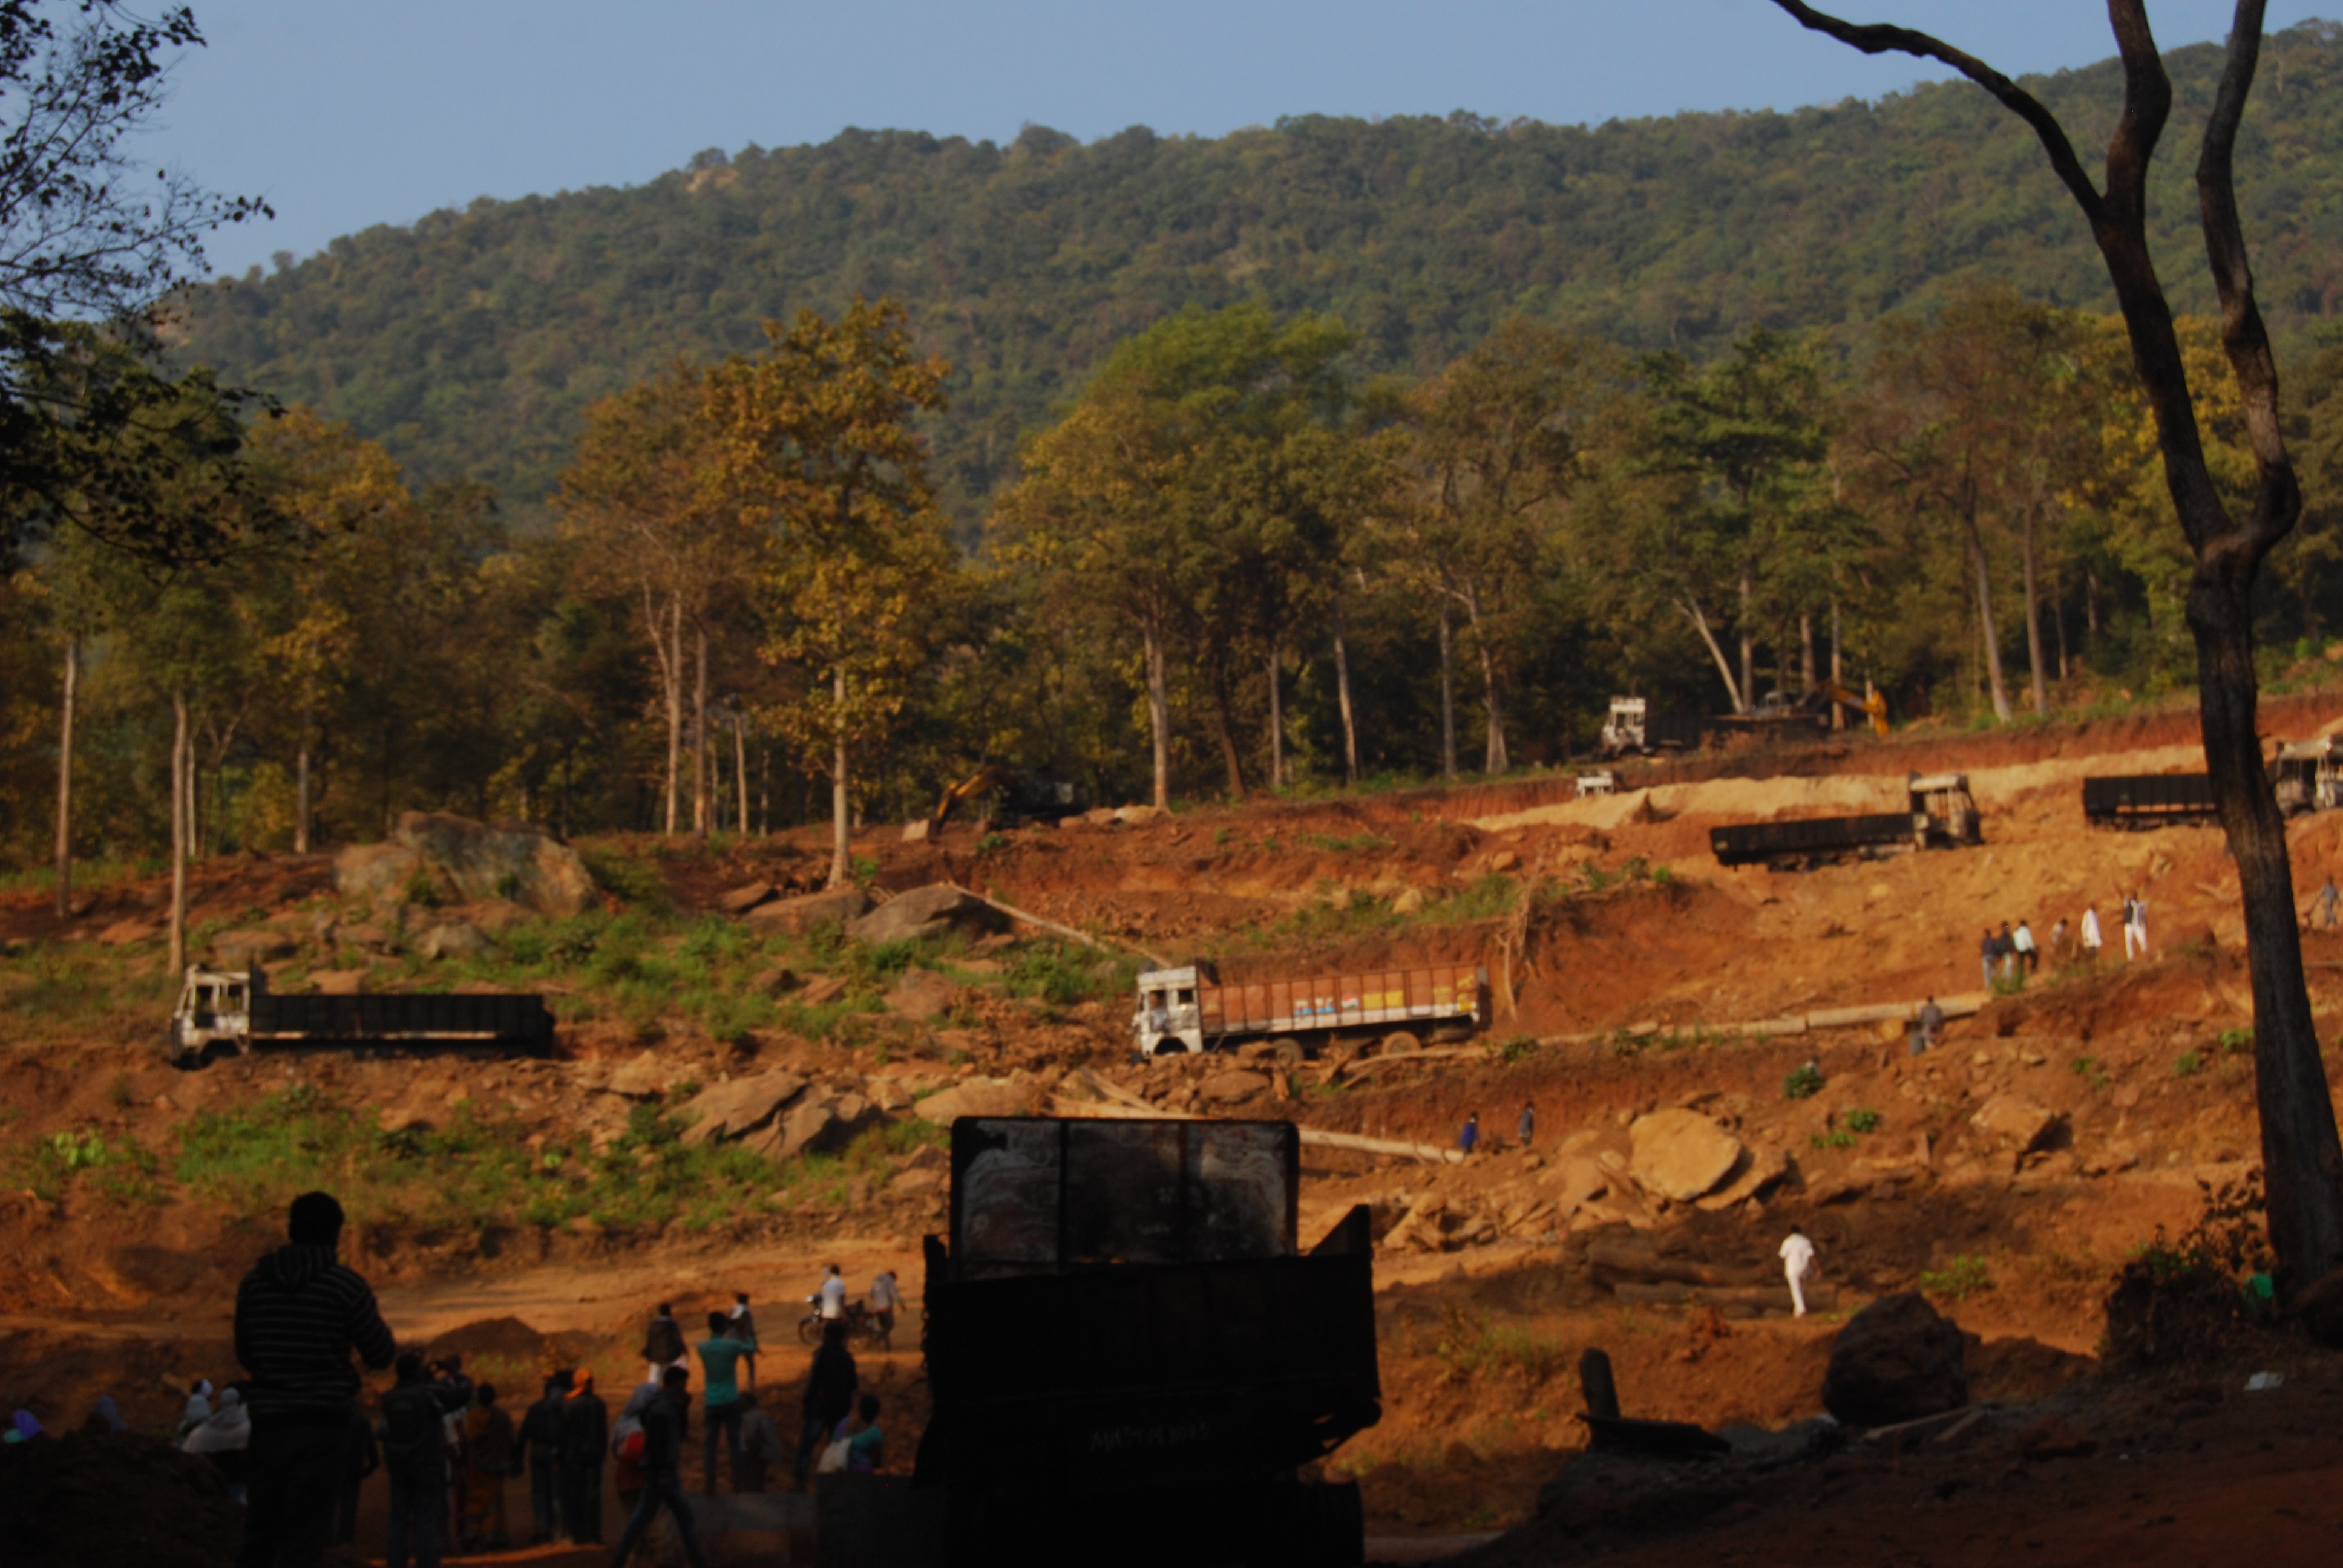 Iron ore mining in the sacred forests of Surjagad in Gadchiroli district, Maharashtra